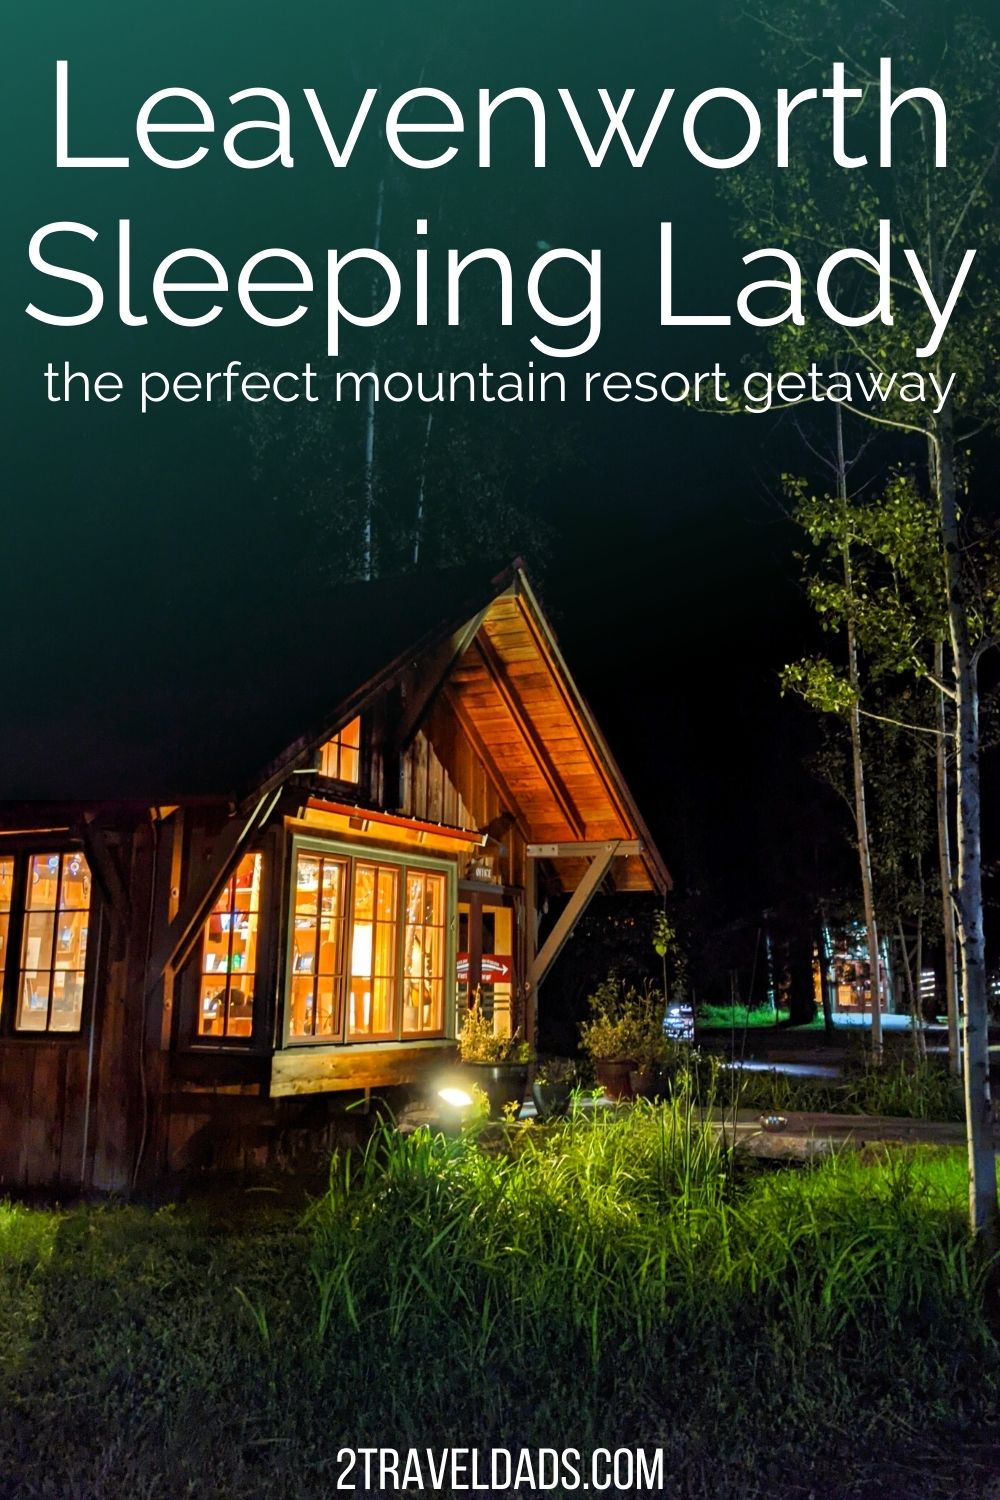 Leavenworth's Sleeping Lady Mountain Resort is the perfect getaway from Seattle. Review and details for staying at the Sleeping Lady, including things to do and best nearby sights.